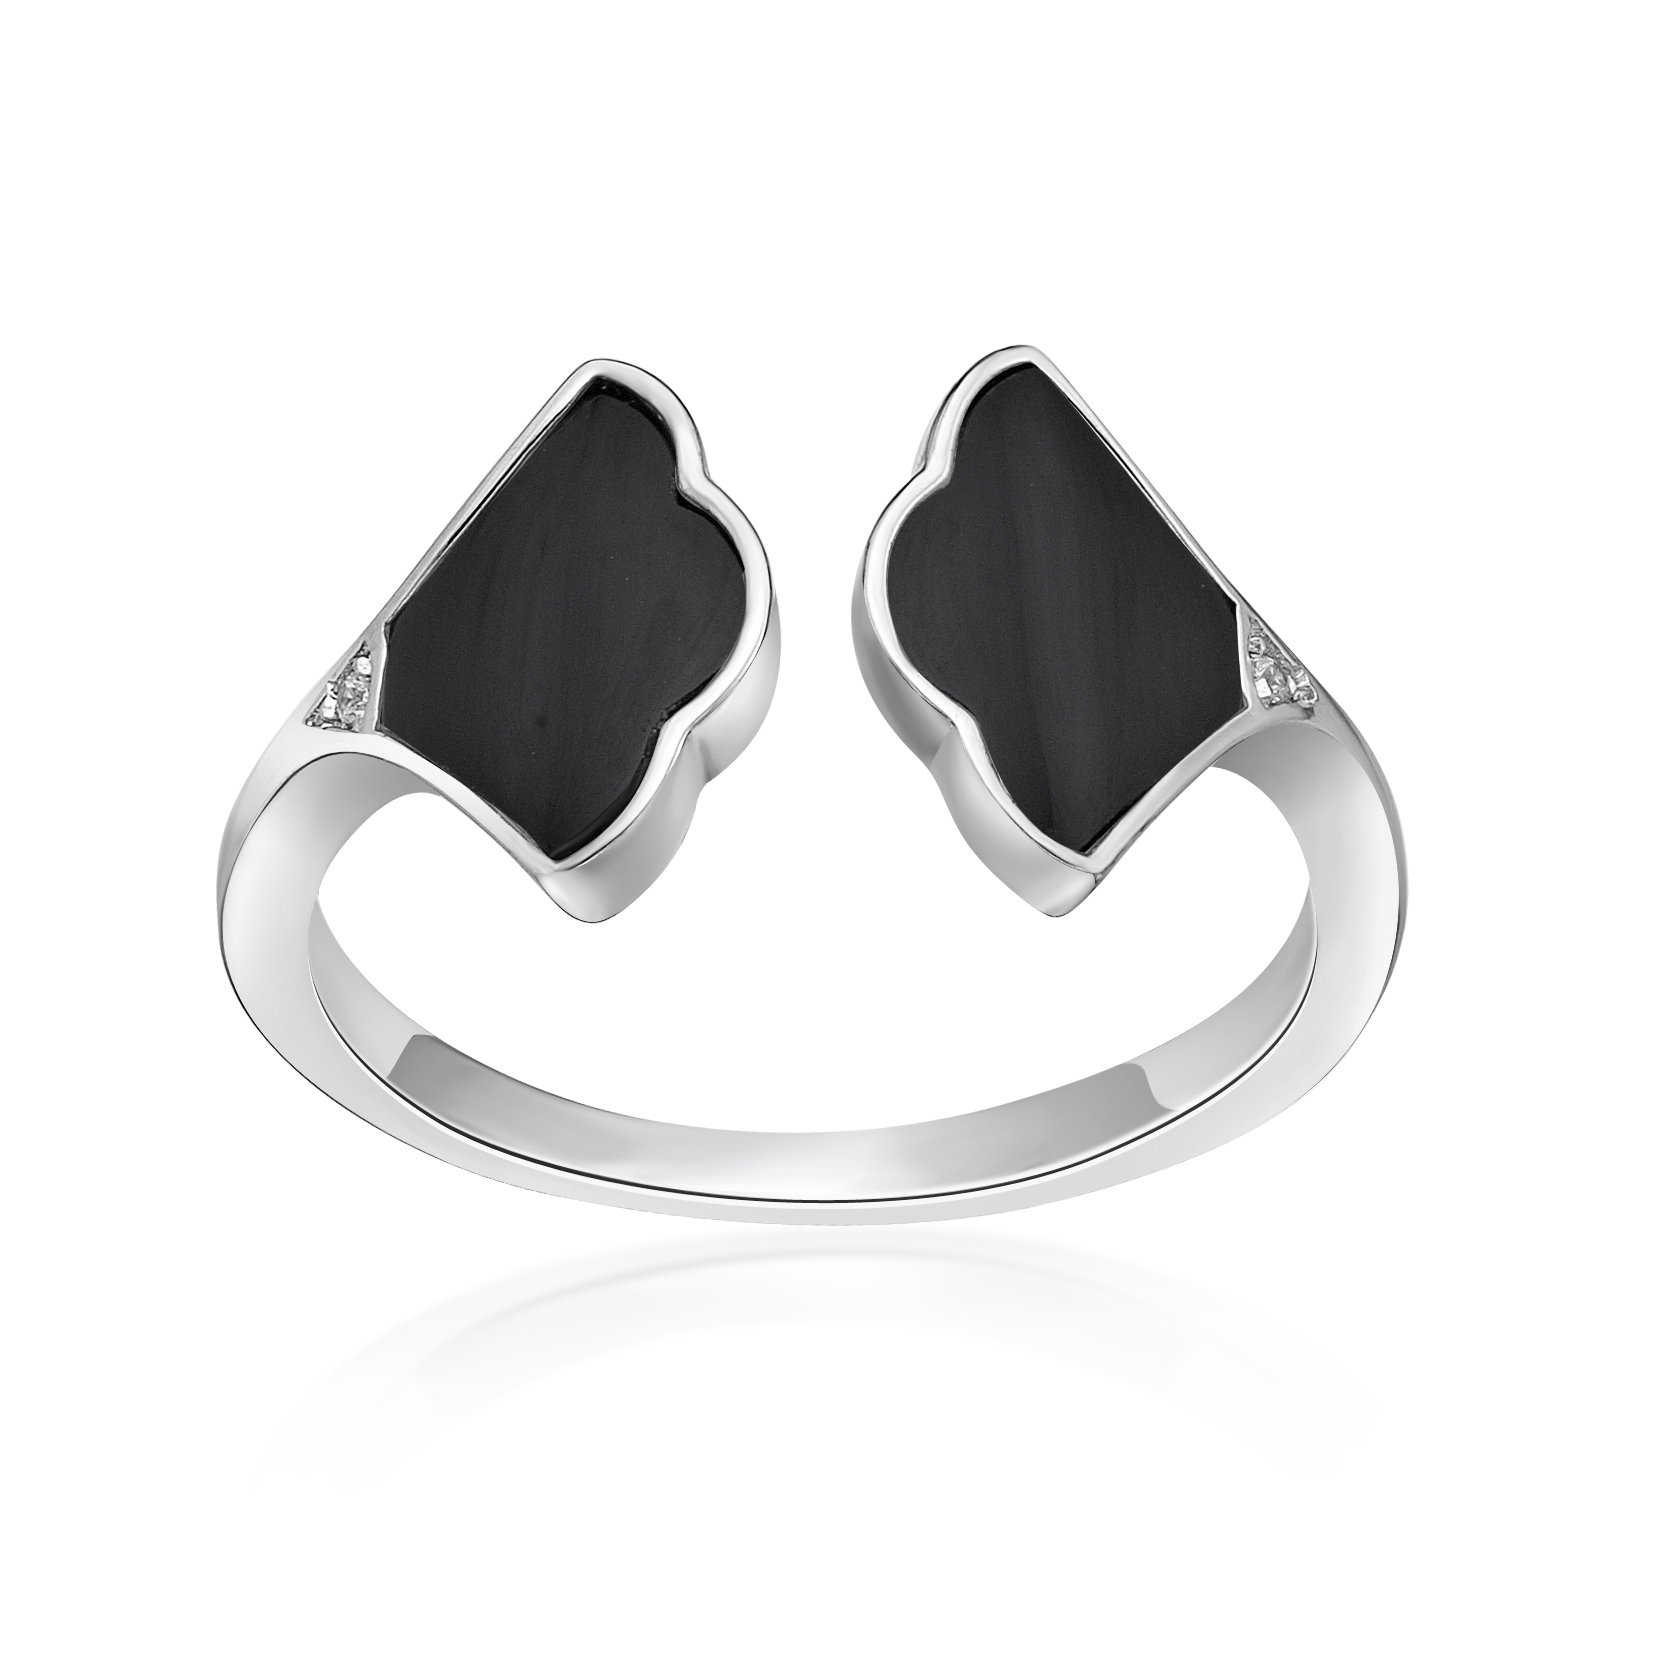 48849-ring-color-sterling-silver-2.jpg